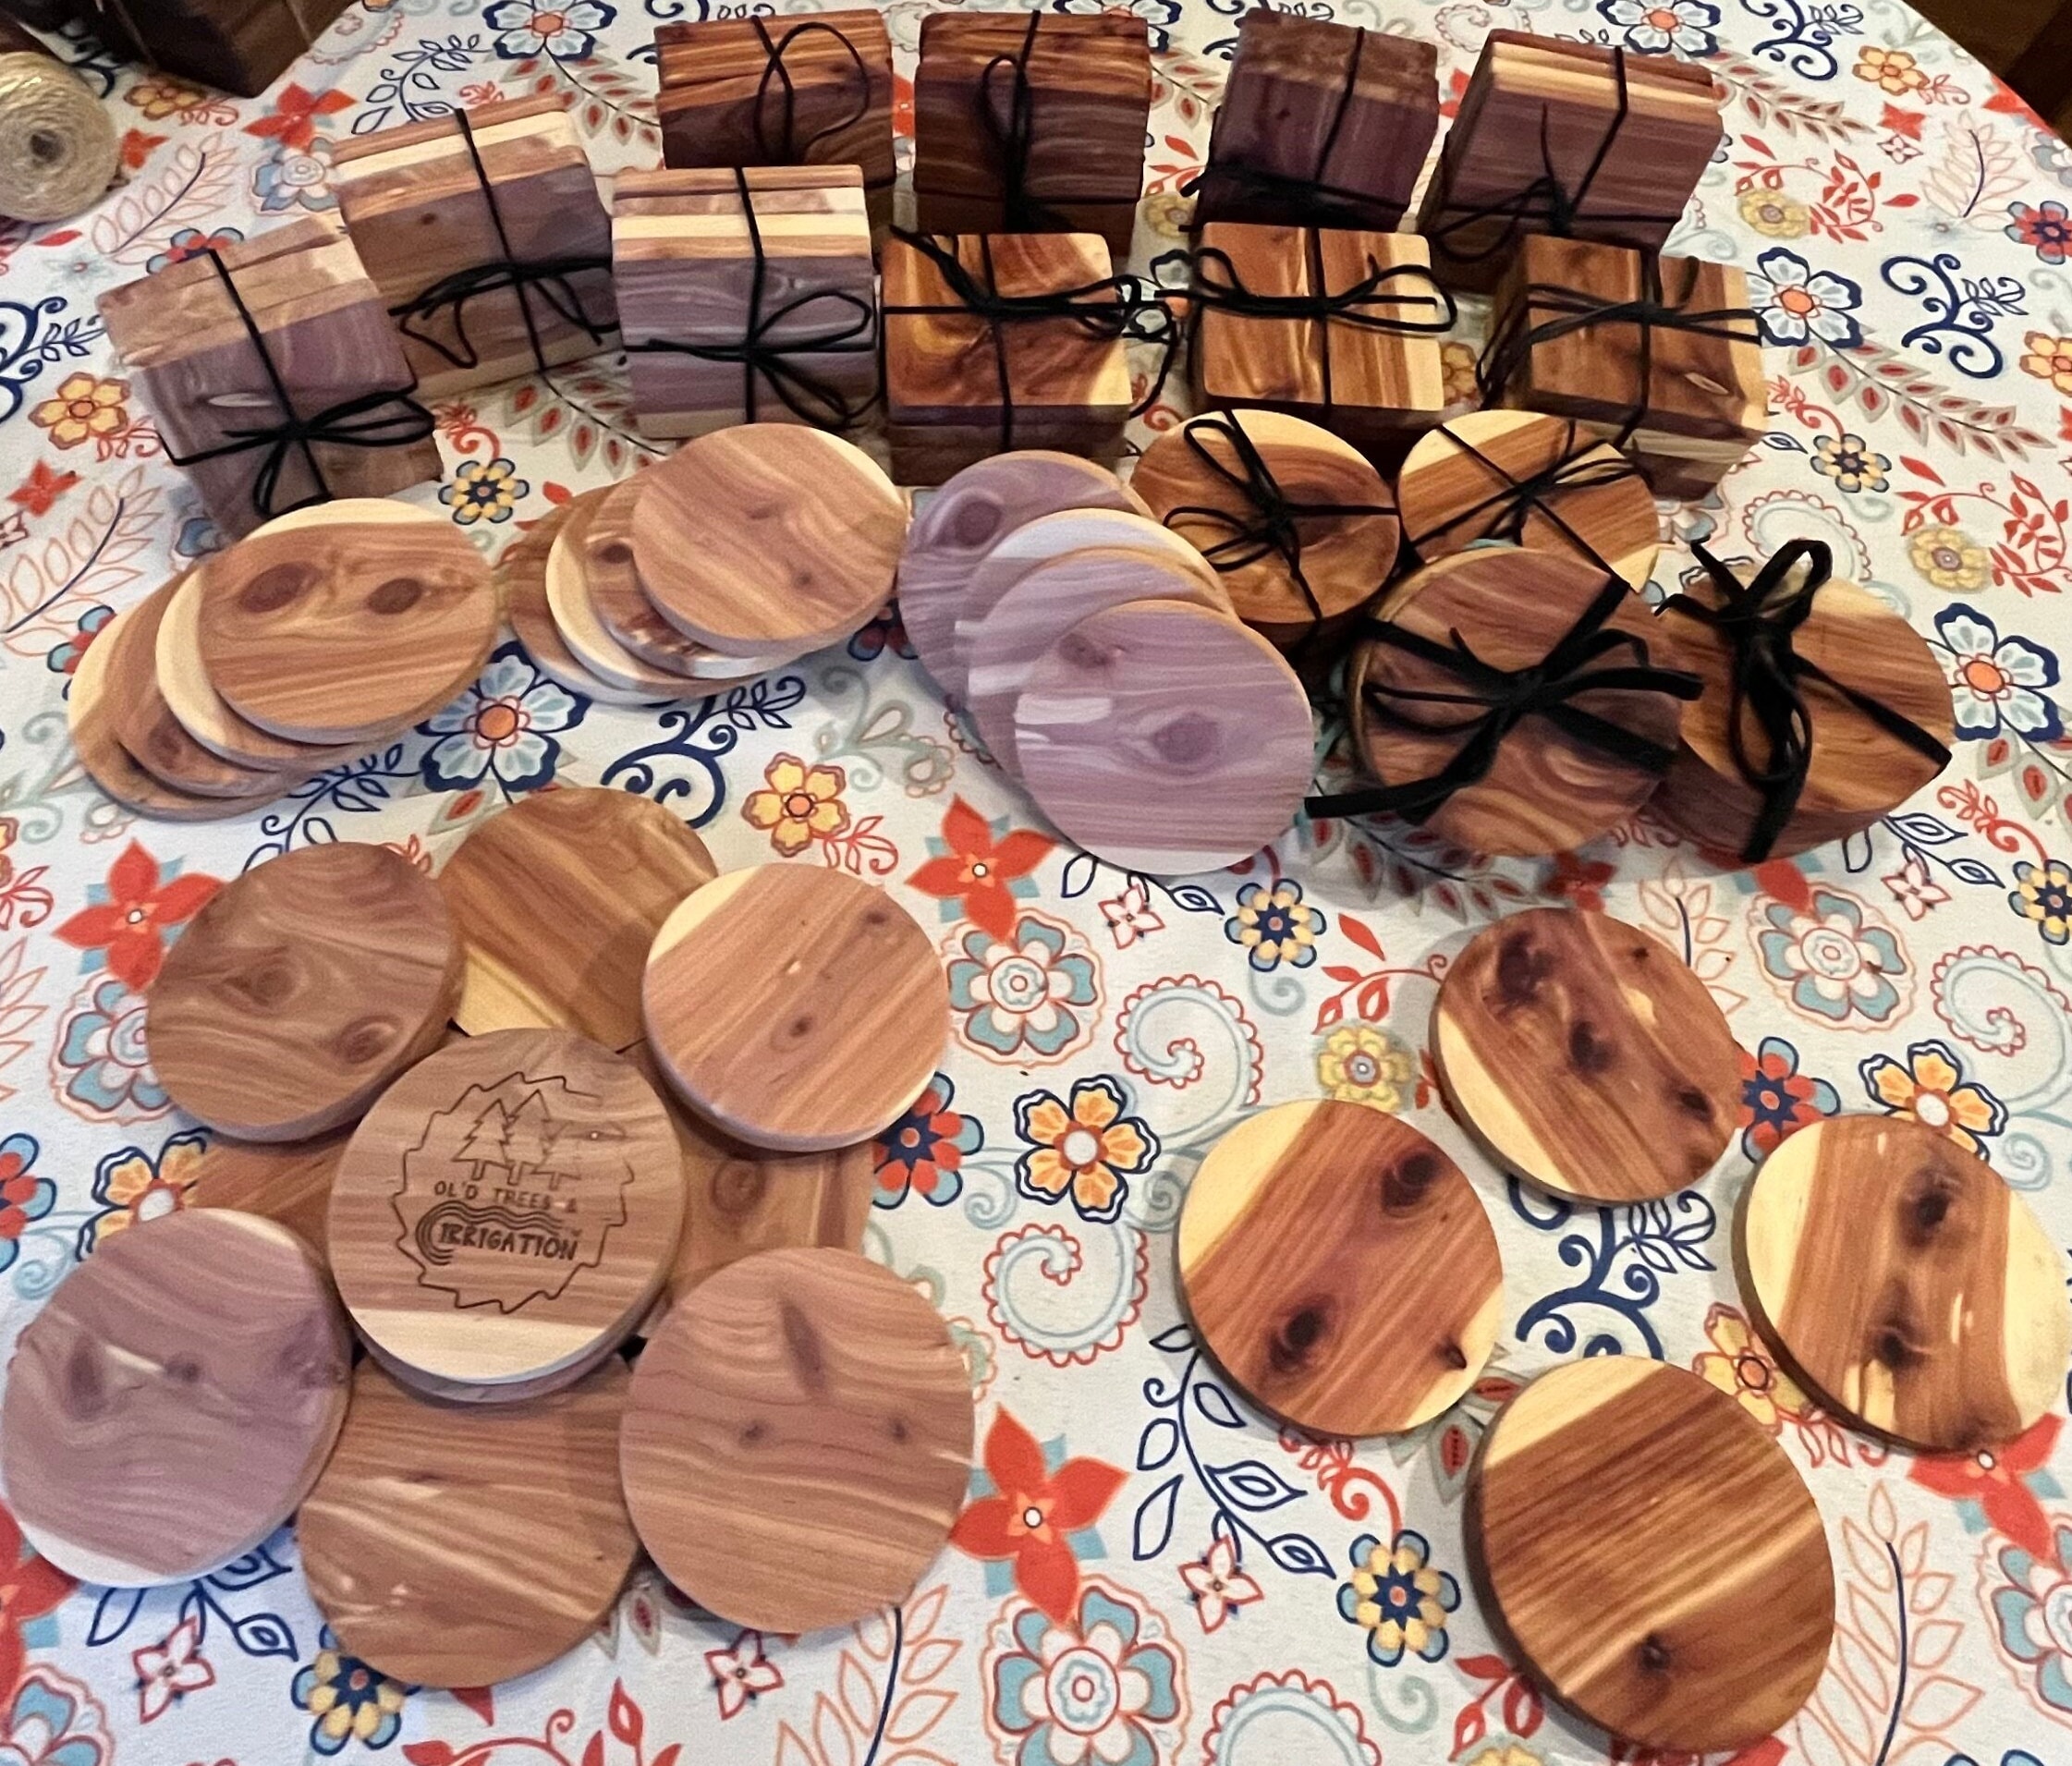 Unfinished Wood Coasters. Renewable, great for DIY projects.